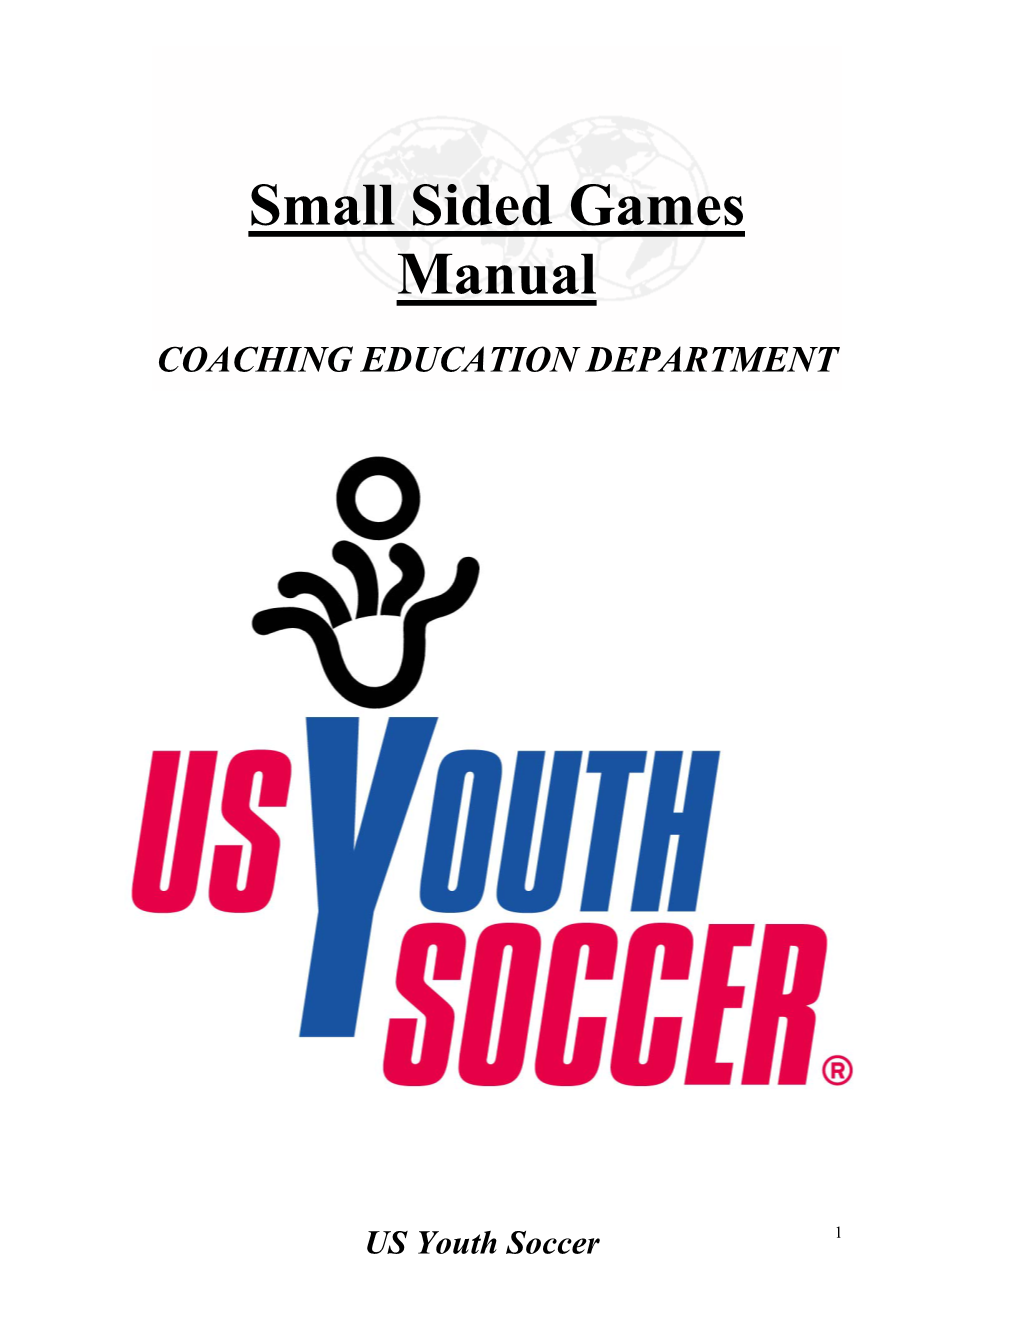 “Why Small Sided Games